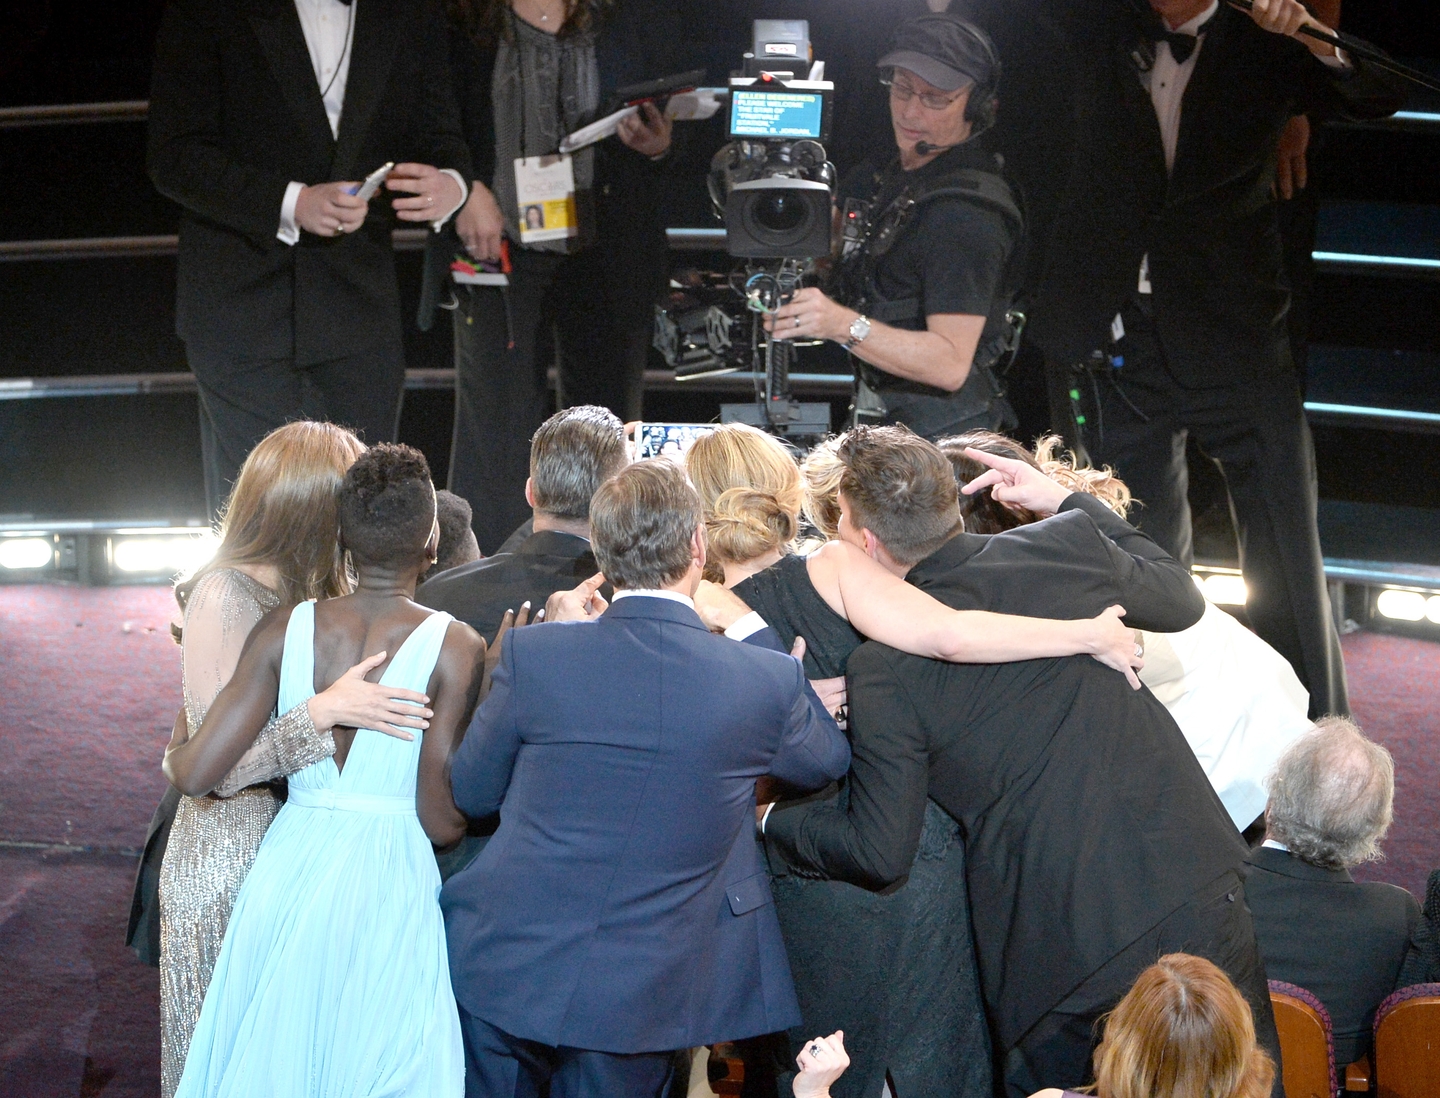 A Decade After The Iconic Ellen Oscars Selfie, Many Still Fear The 'Ellen Oscars Selfie Curse'